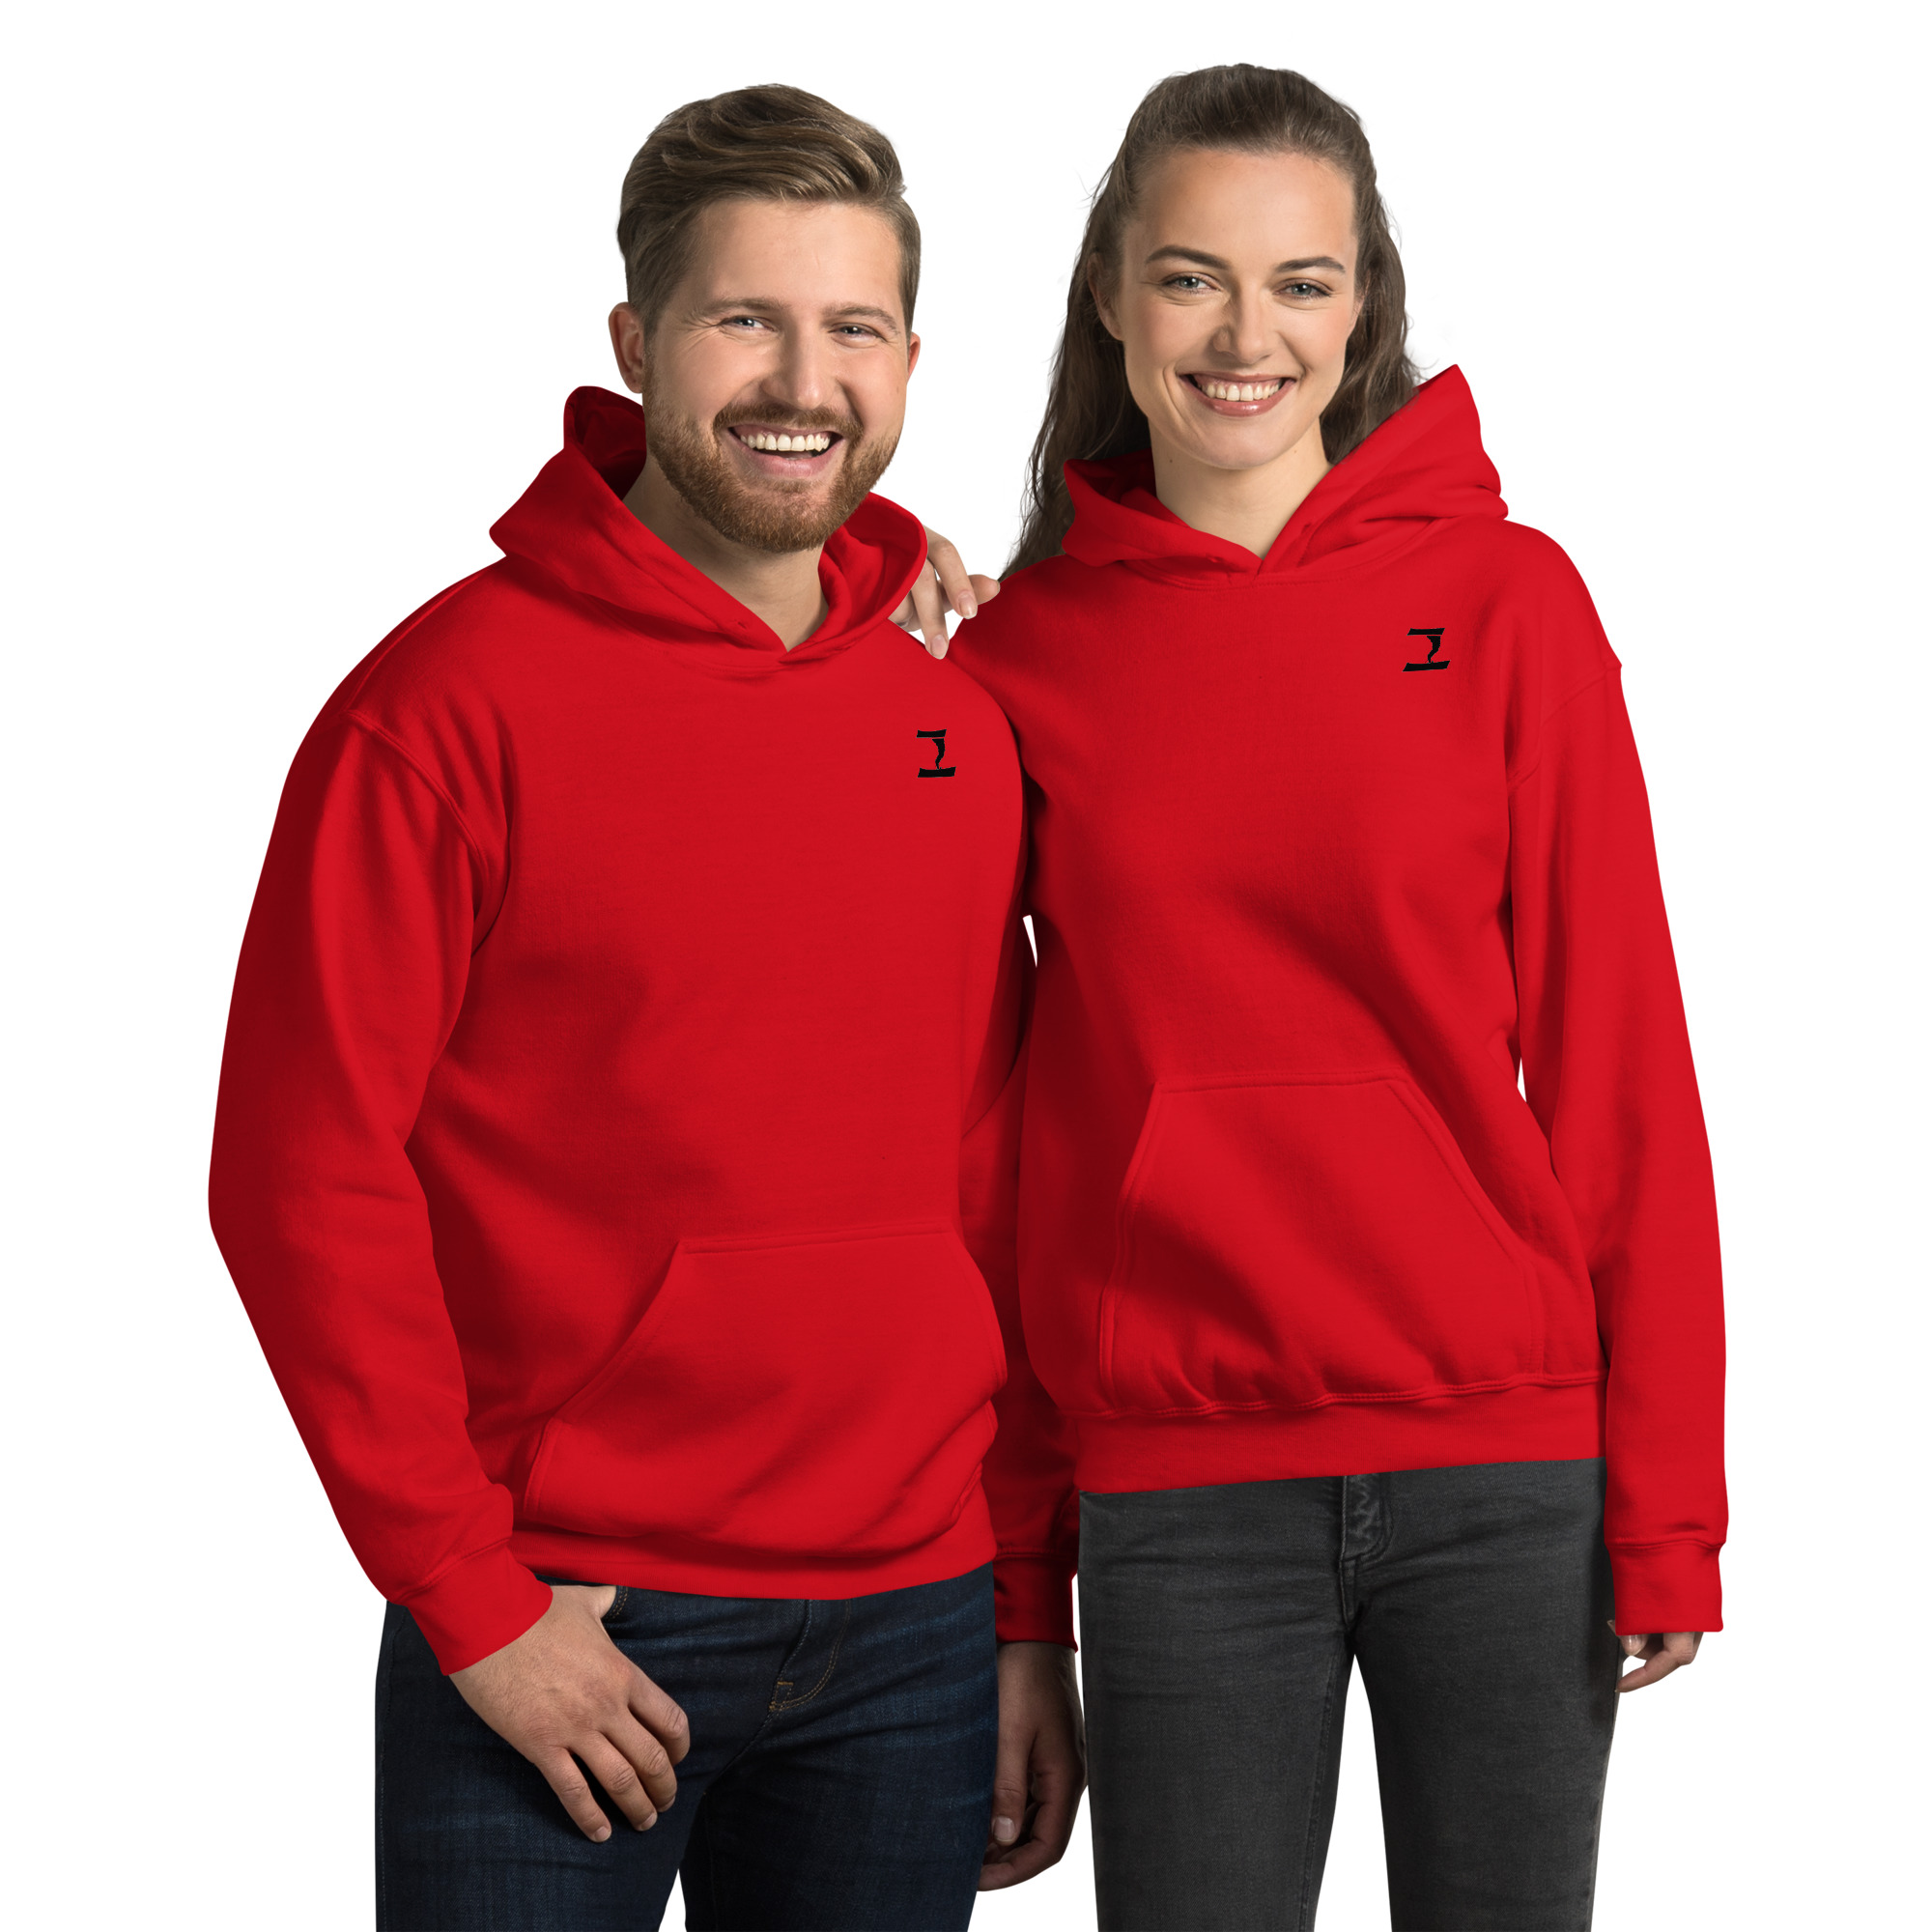 unisex-heavy-blend-hoodie-red-front-632f5c5edc3a2.jpg